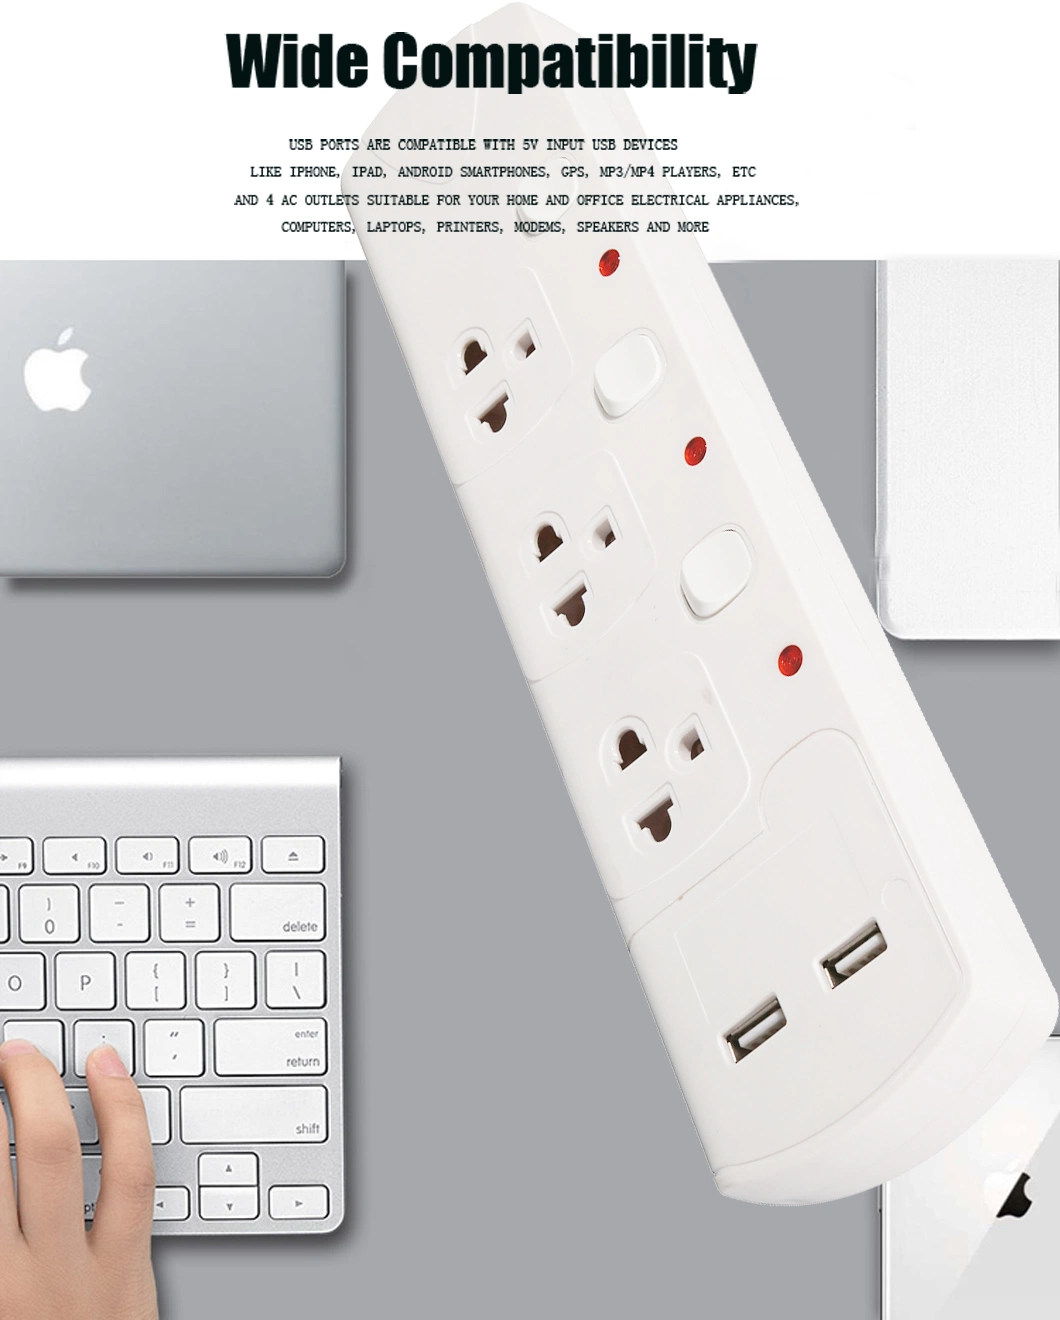 Thailand USB Extension Socket with Individual Switch and Overload Protection